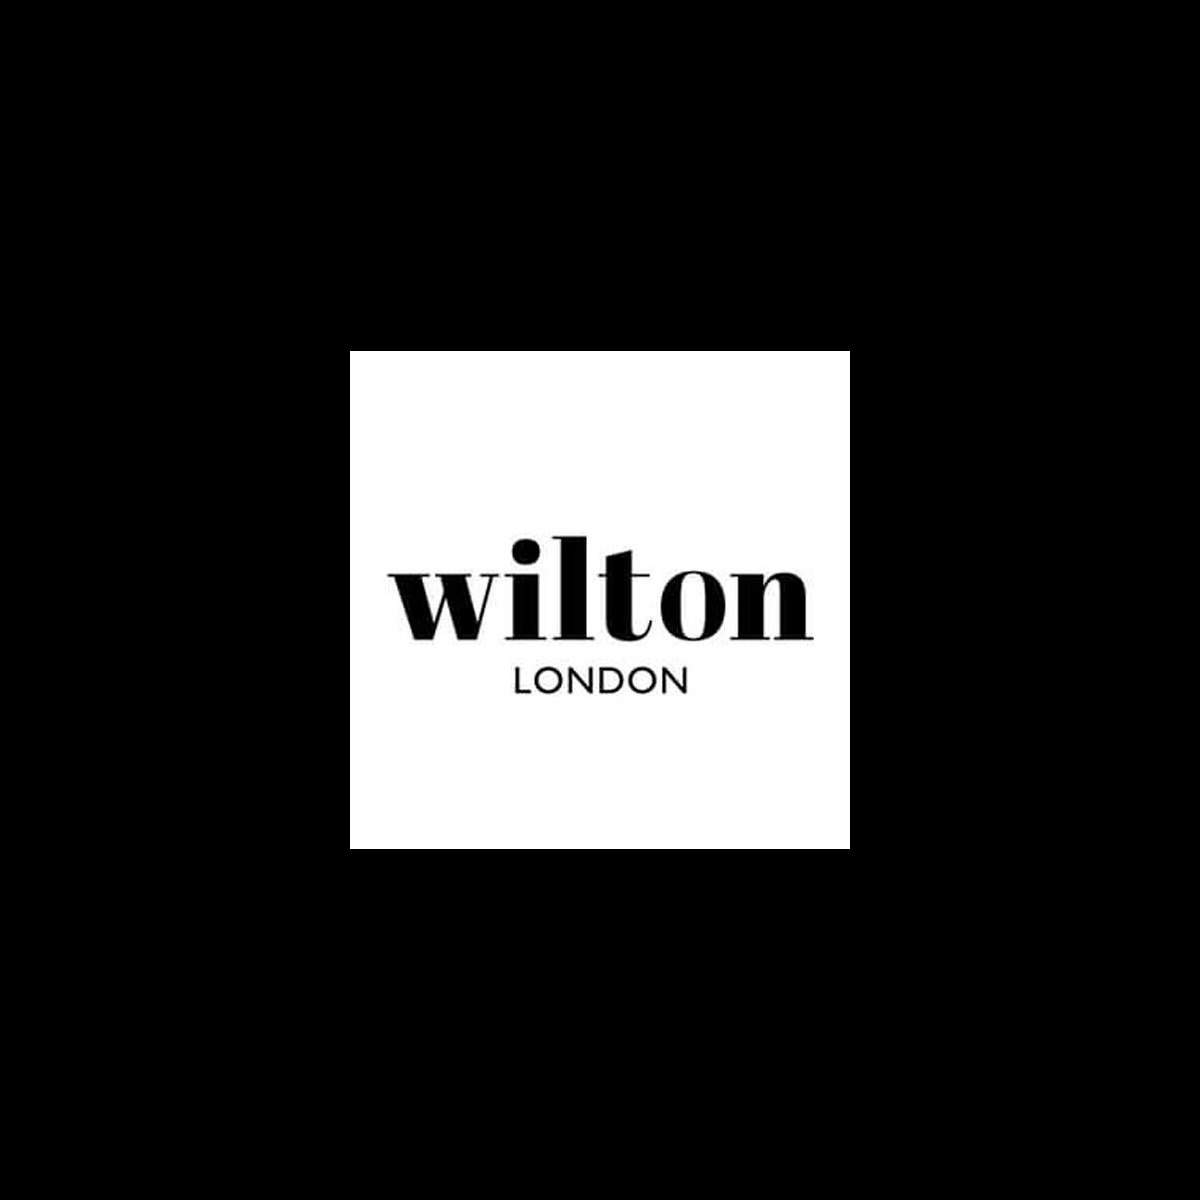 Where to Buy Wilton London Products